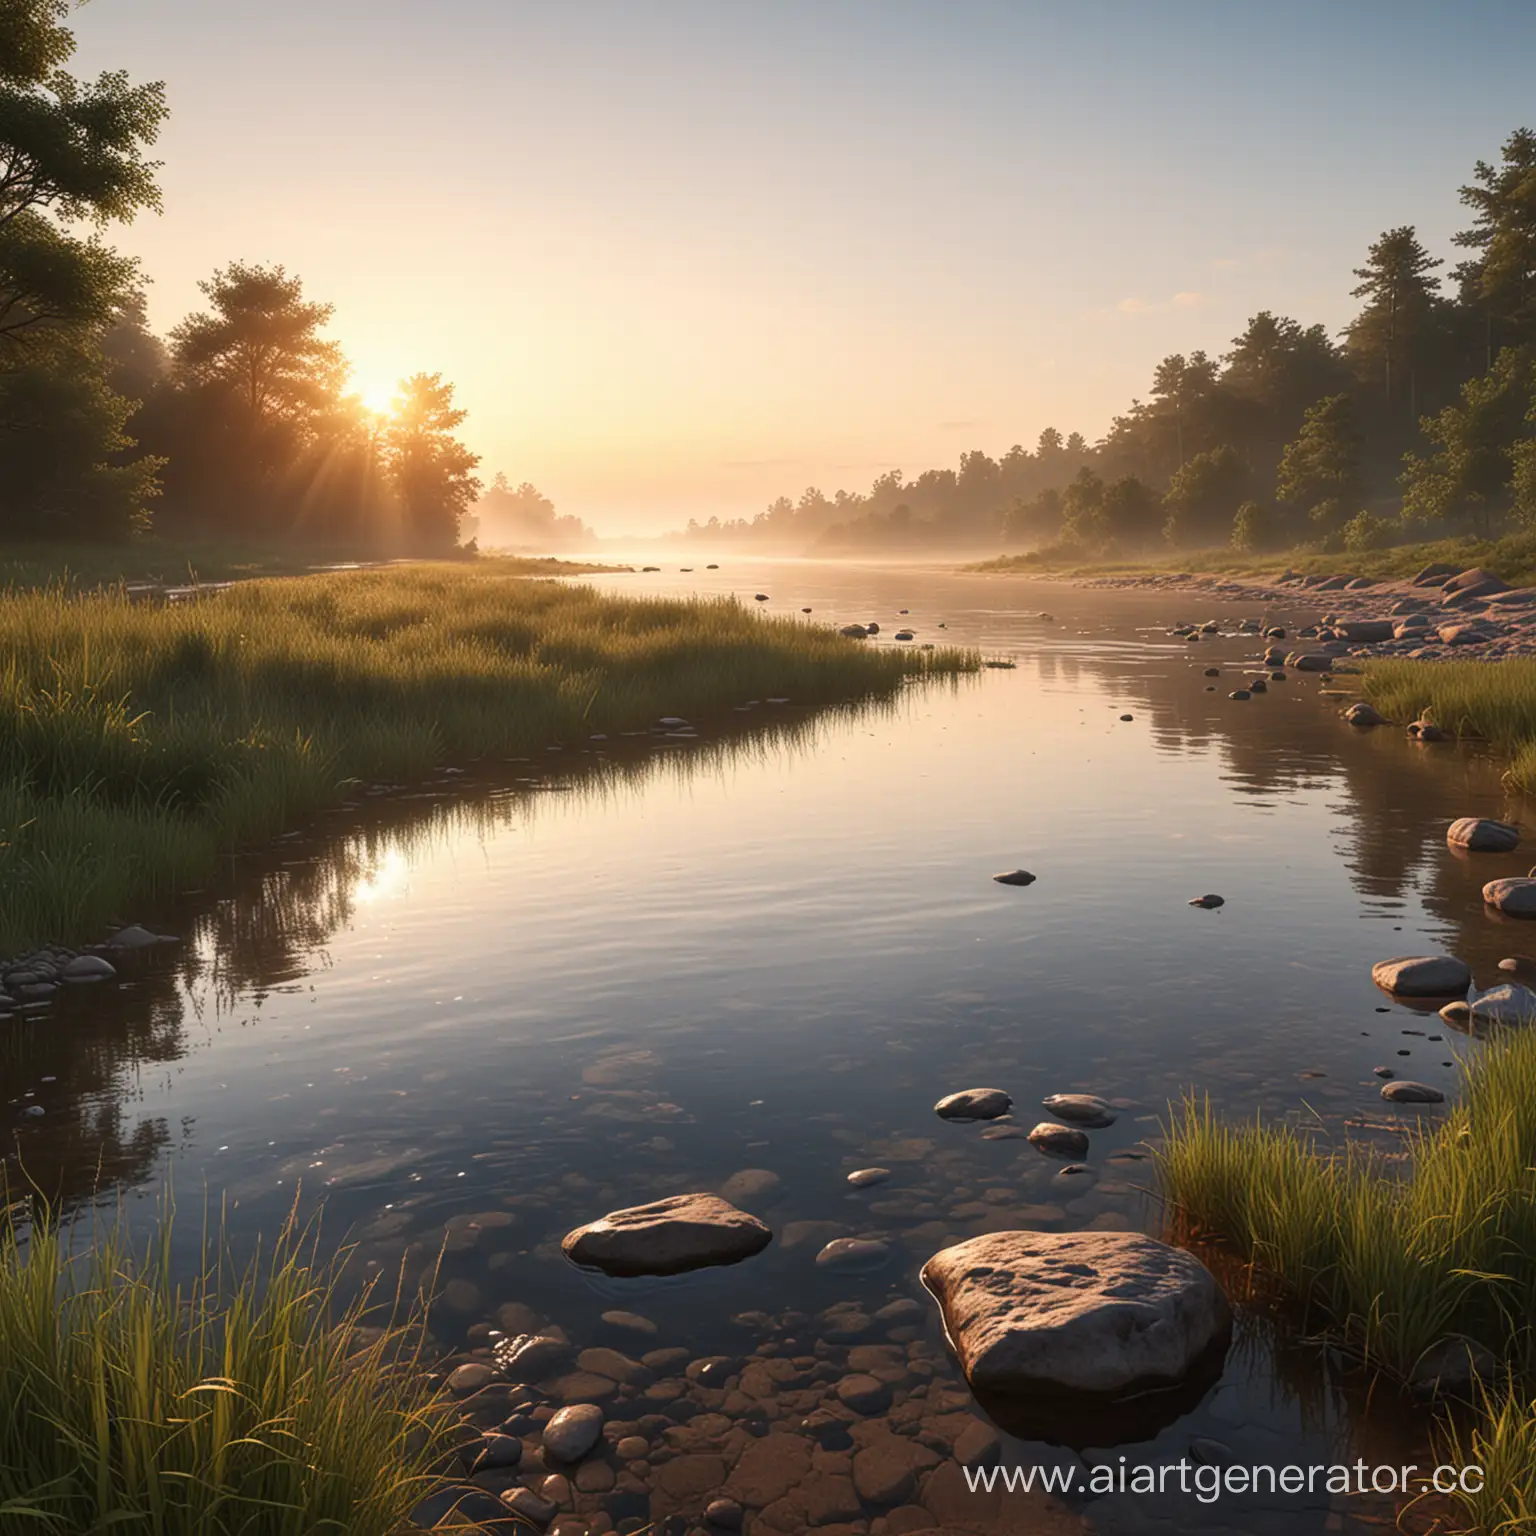 Realistic-Summer-Dawn-by-the-River-Tranquil-Shoreline-Scene